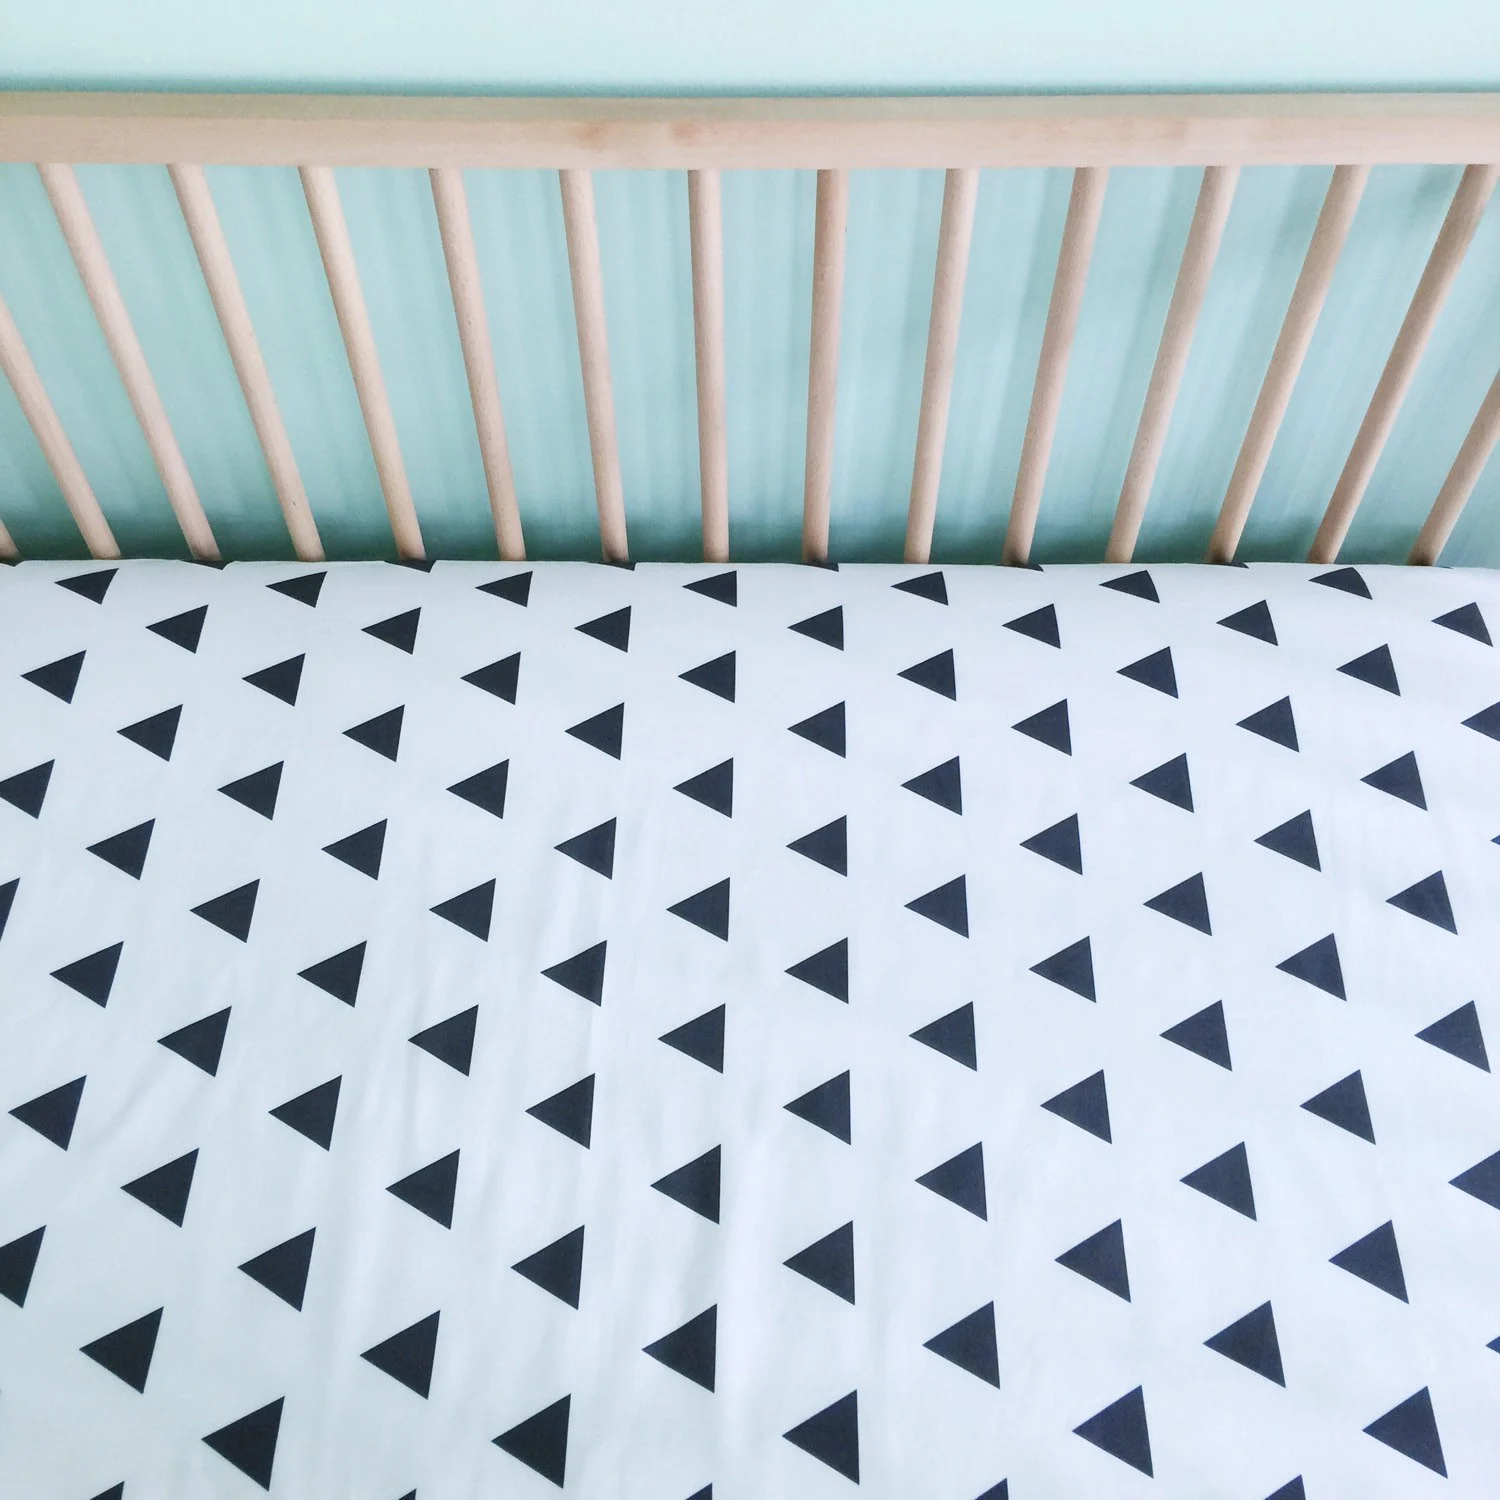 Black Triangles Crib Sheet from Ivie Baby on Etsy